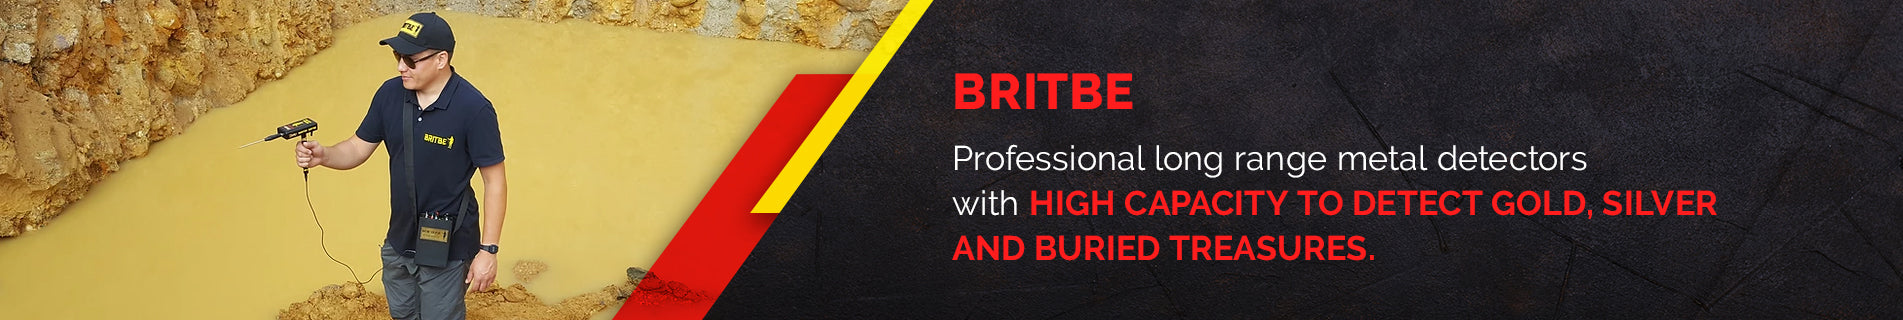 Britbe geolocators and metal detectors | Free Shipping on USA